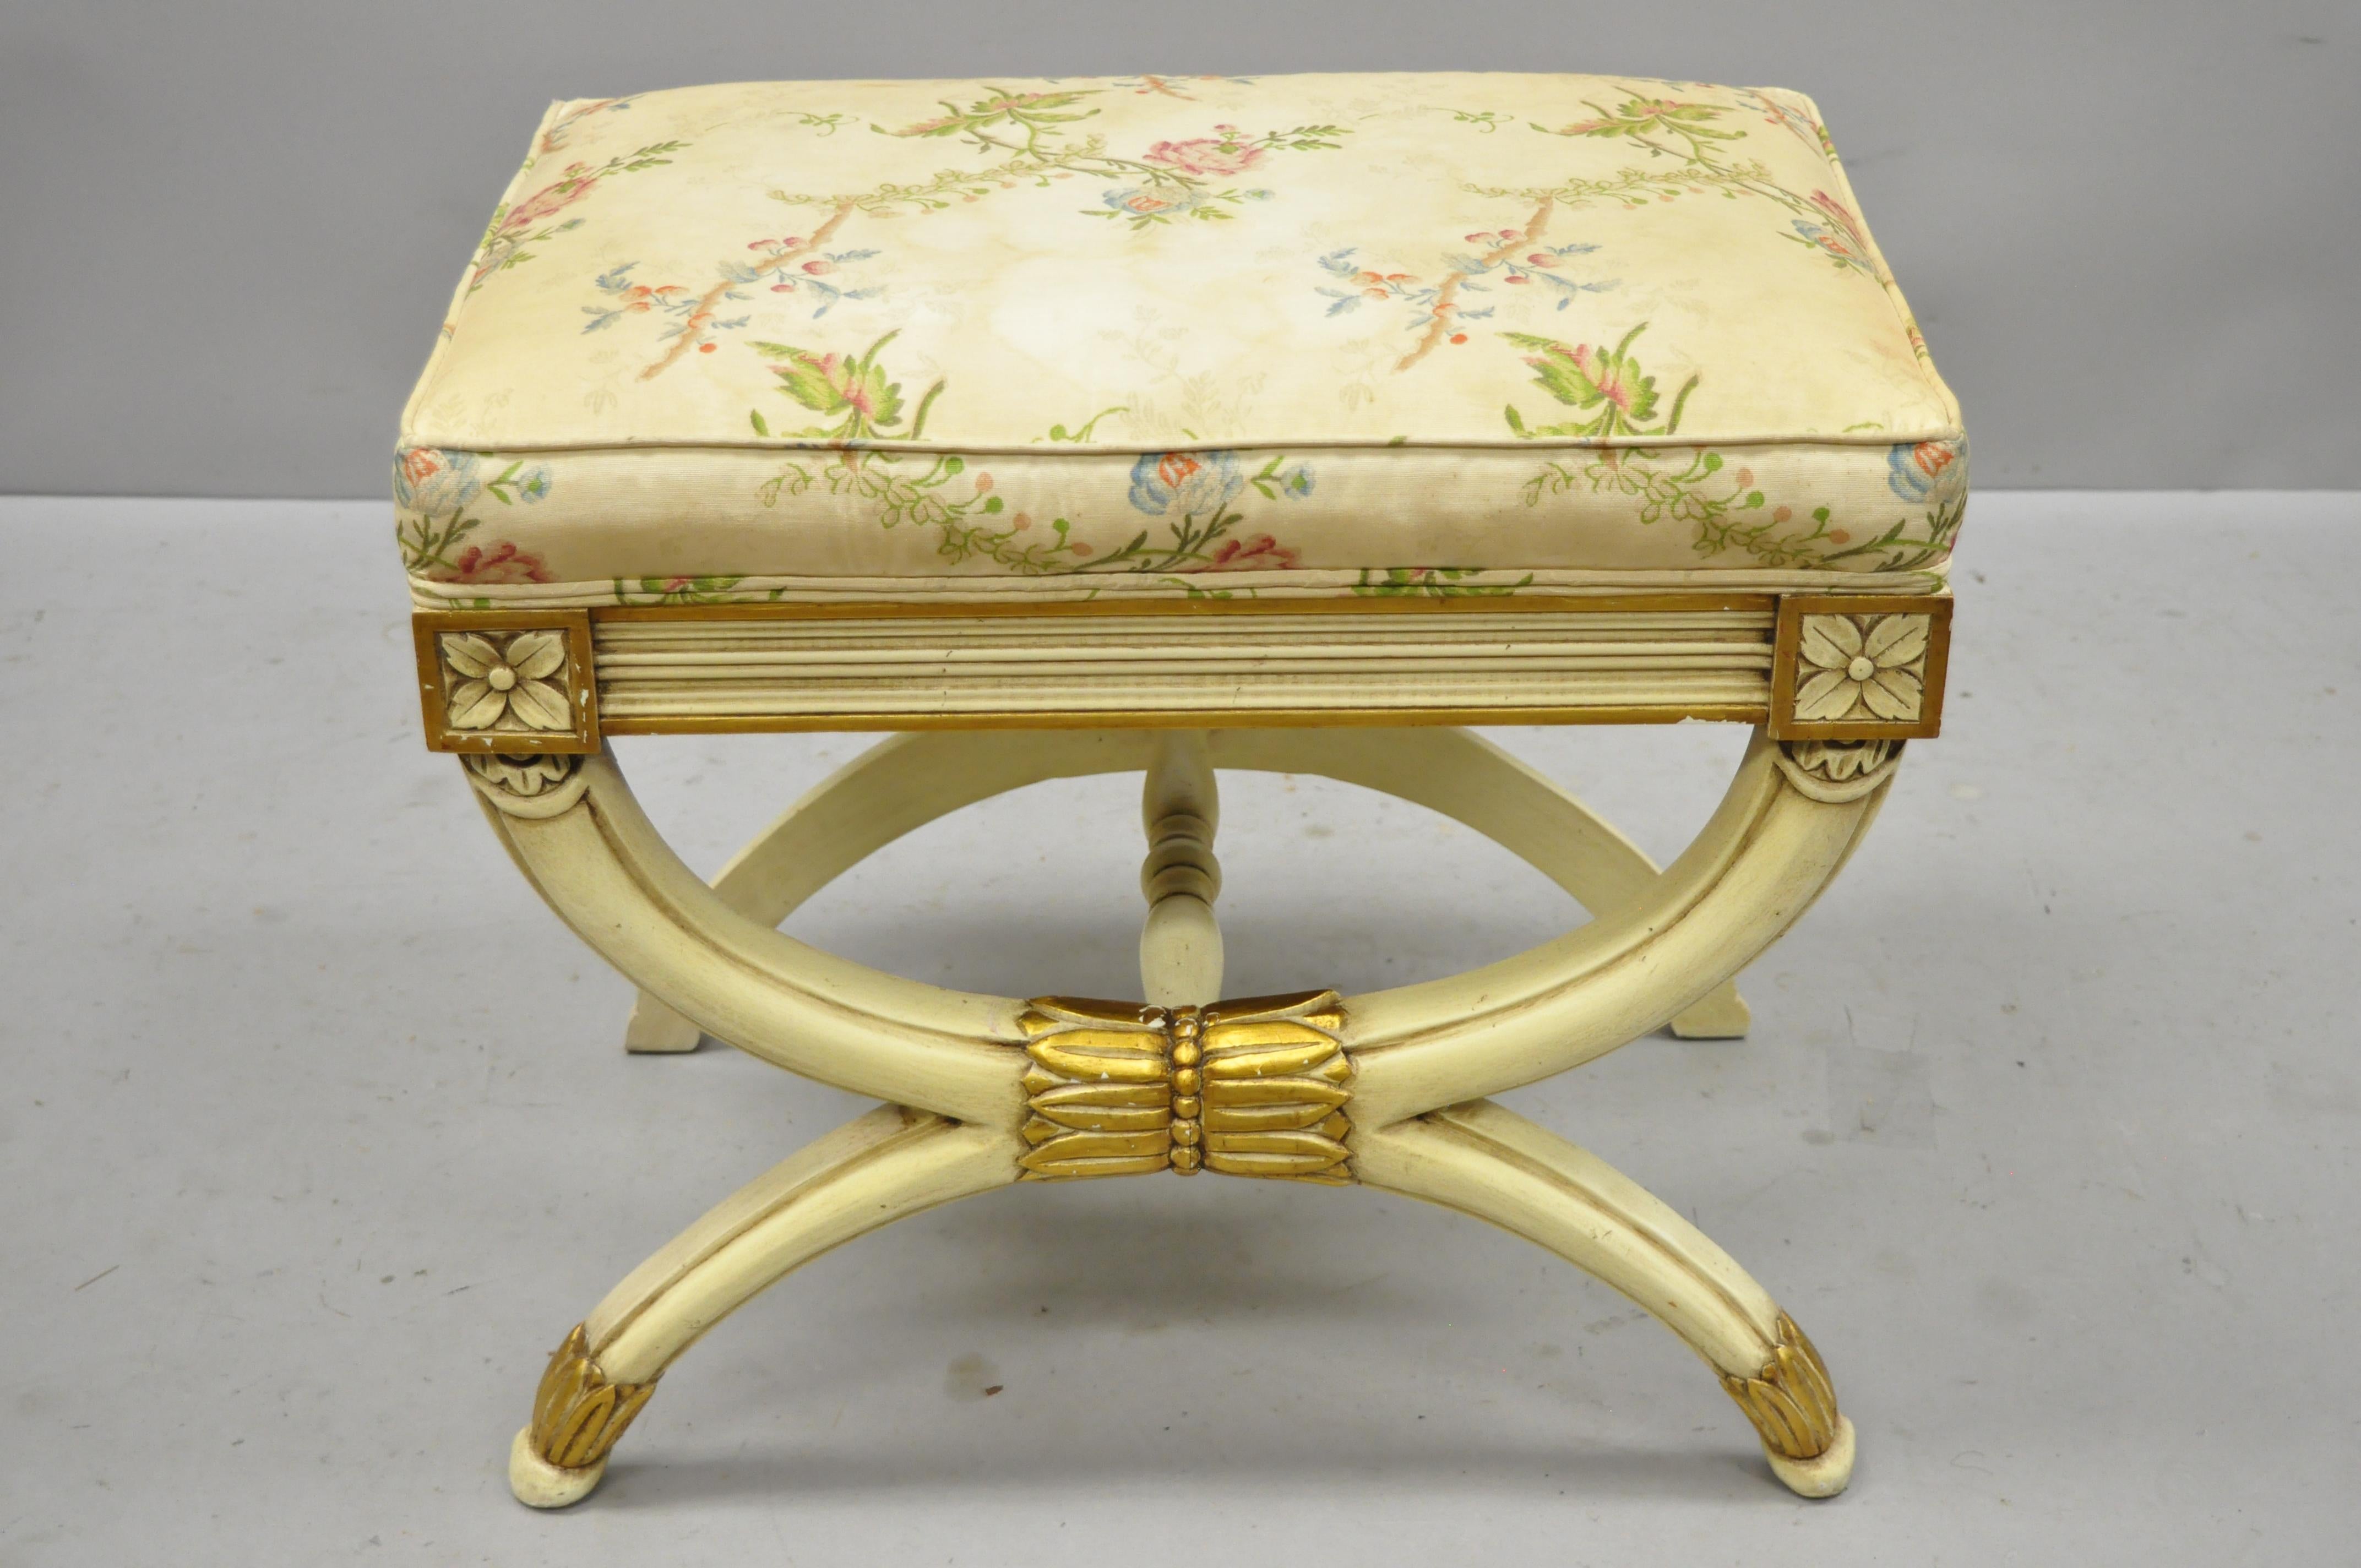 Karges X frame French neoclassical Regency style Curule bench stool. Item features old and cream painted finish, Curule X frame base, solid wood frame, upholstered seat, original label, great style and form, circa mid-20th century. Measurements: